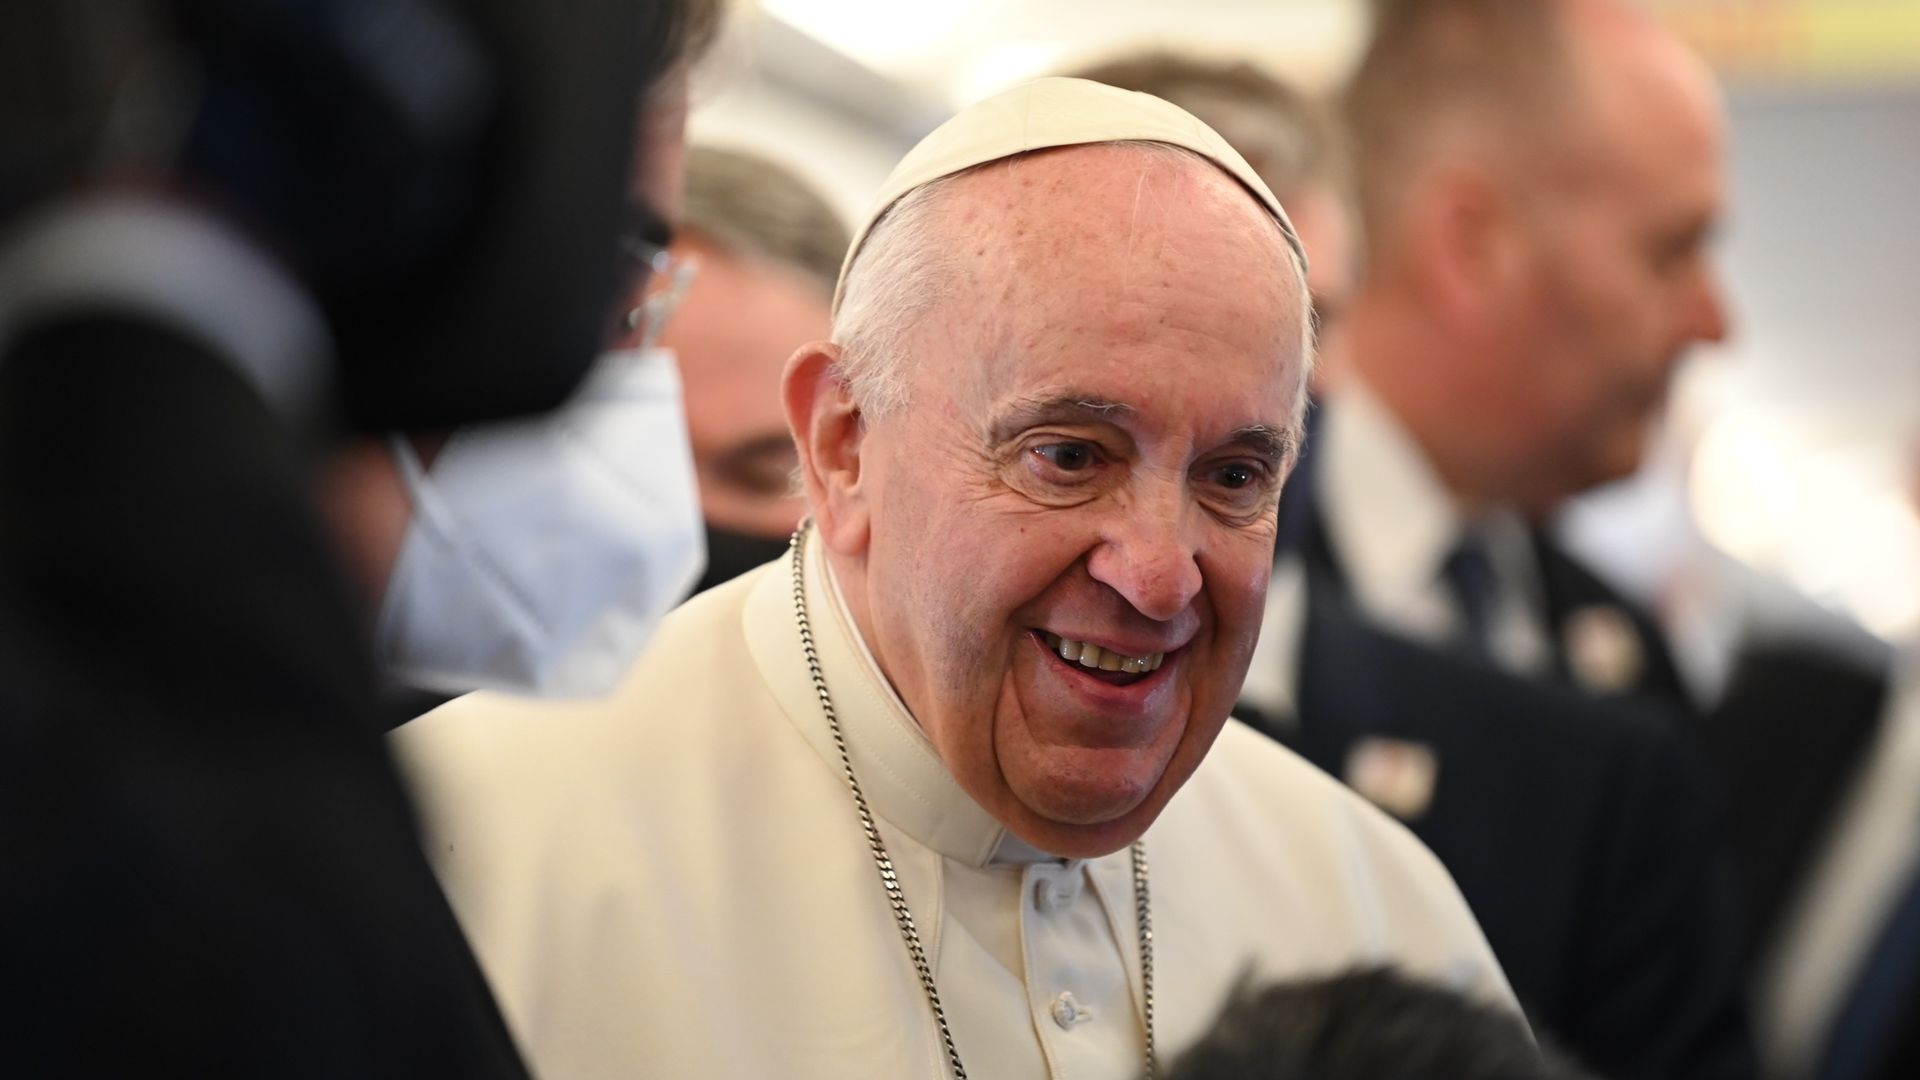  Pope Francis speaks to journalists on a plane in Malta, Valletta.